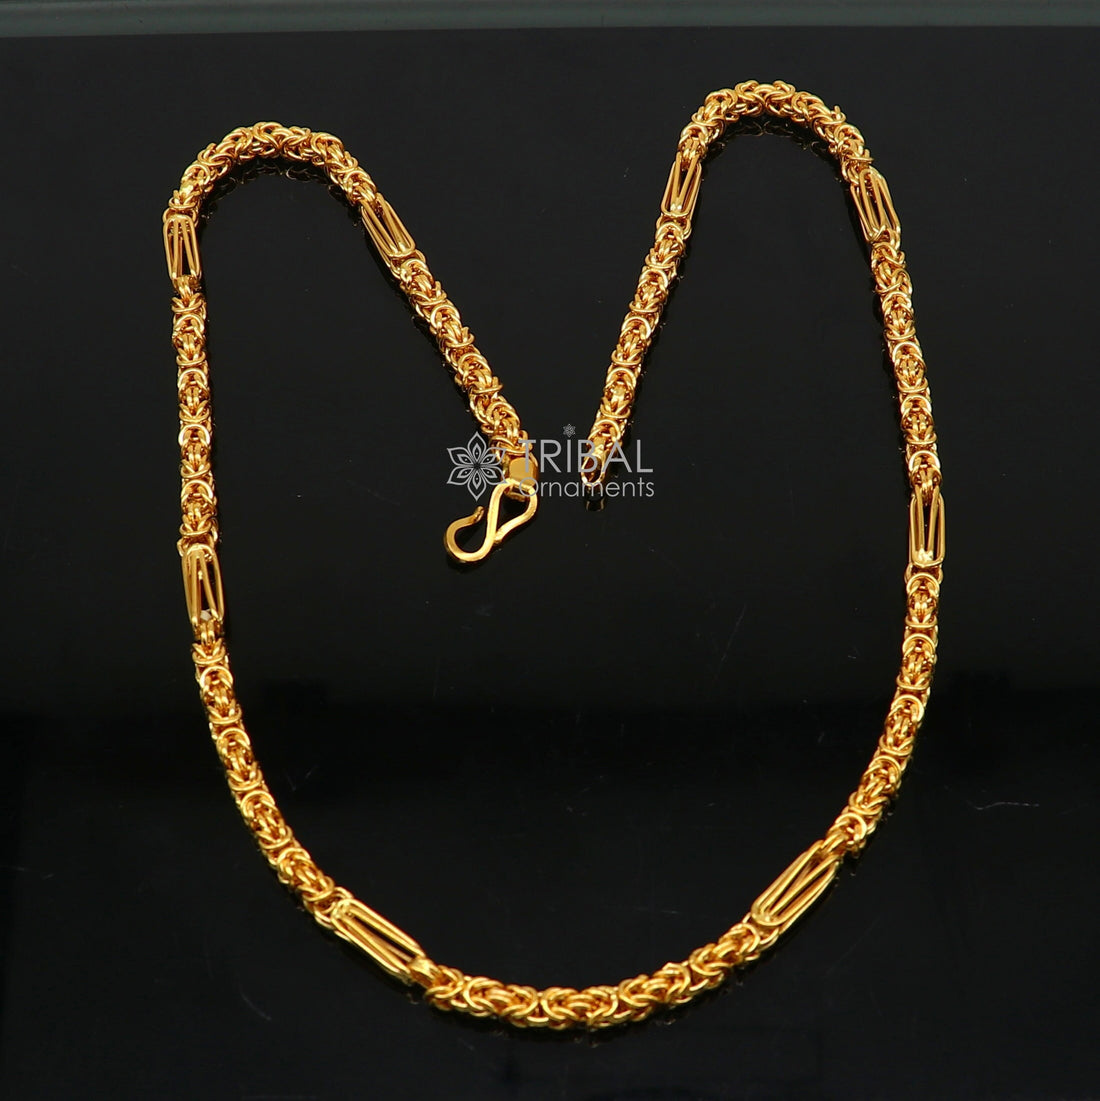 22kt yellow gold handmade fabulous modern trendy unique design certified gold byzantine luxury chain necklace unisex gifting jewelry gch573 - TRIBAL ORNAMENTS